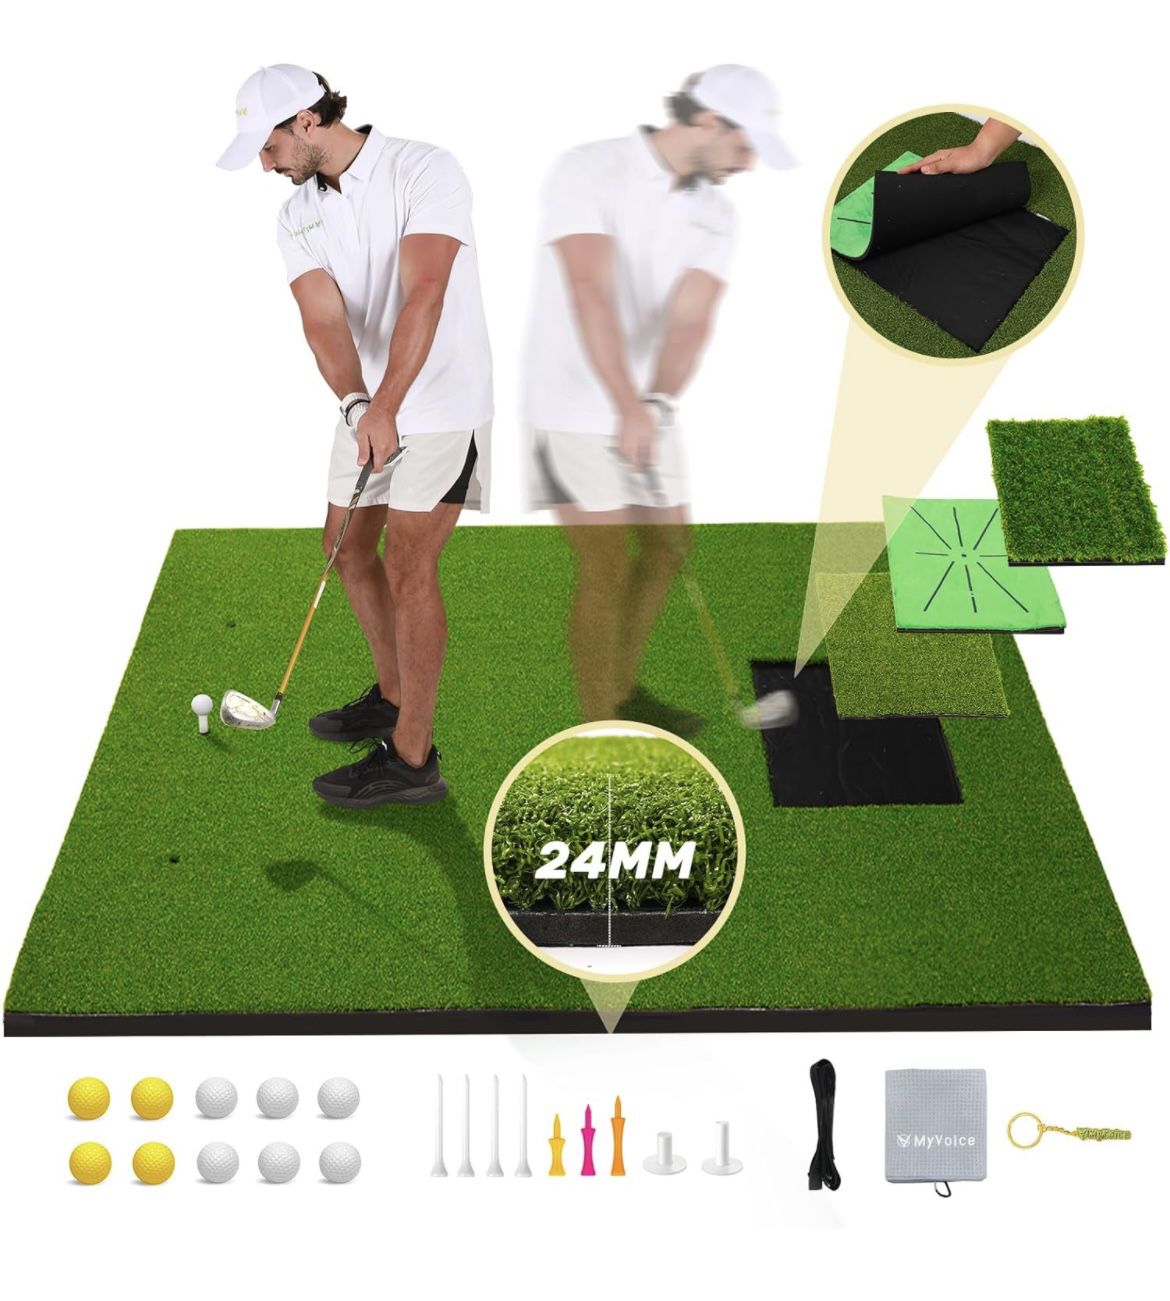 Golf Hitting Mat Set - 5x4 ft, Interchangeable Inserts for Precision Drives, Chips, Swings, Putts - Ideal Indoor & Outdoor Practice, Perfect Golf Gift